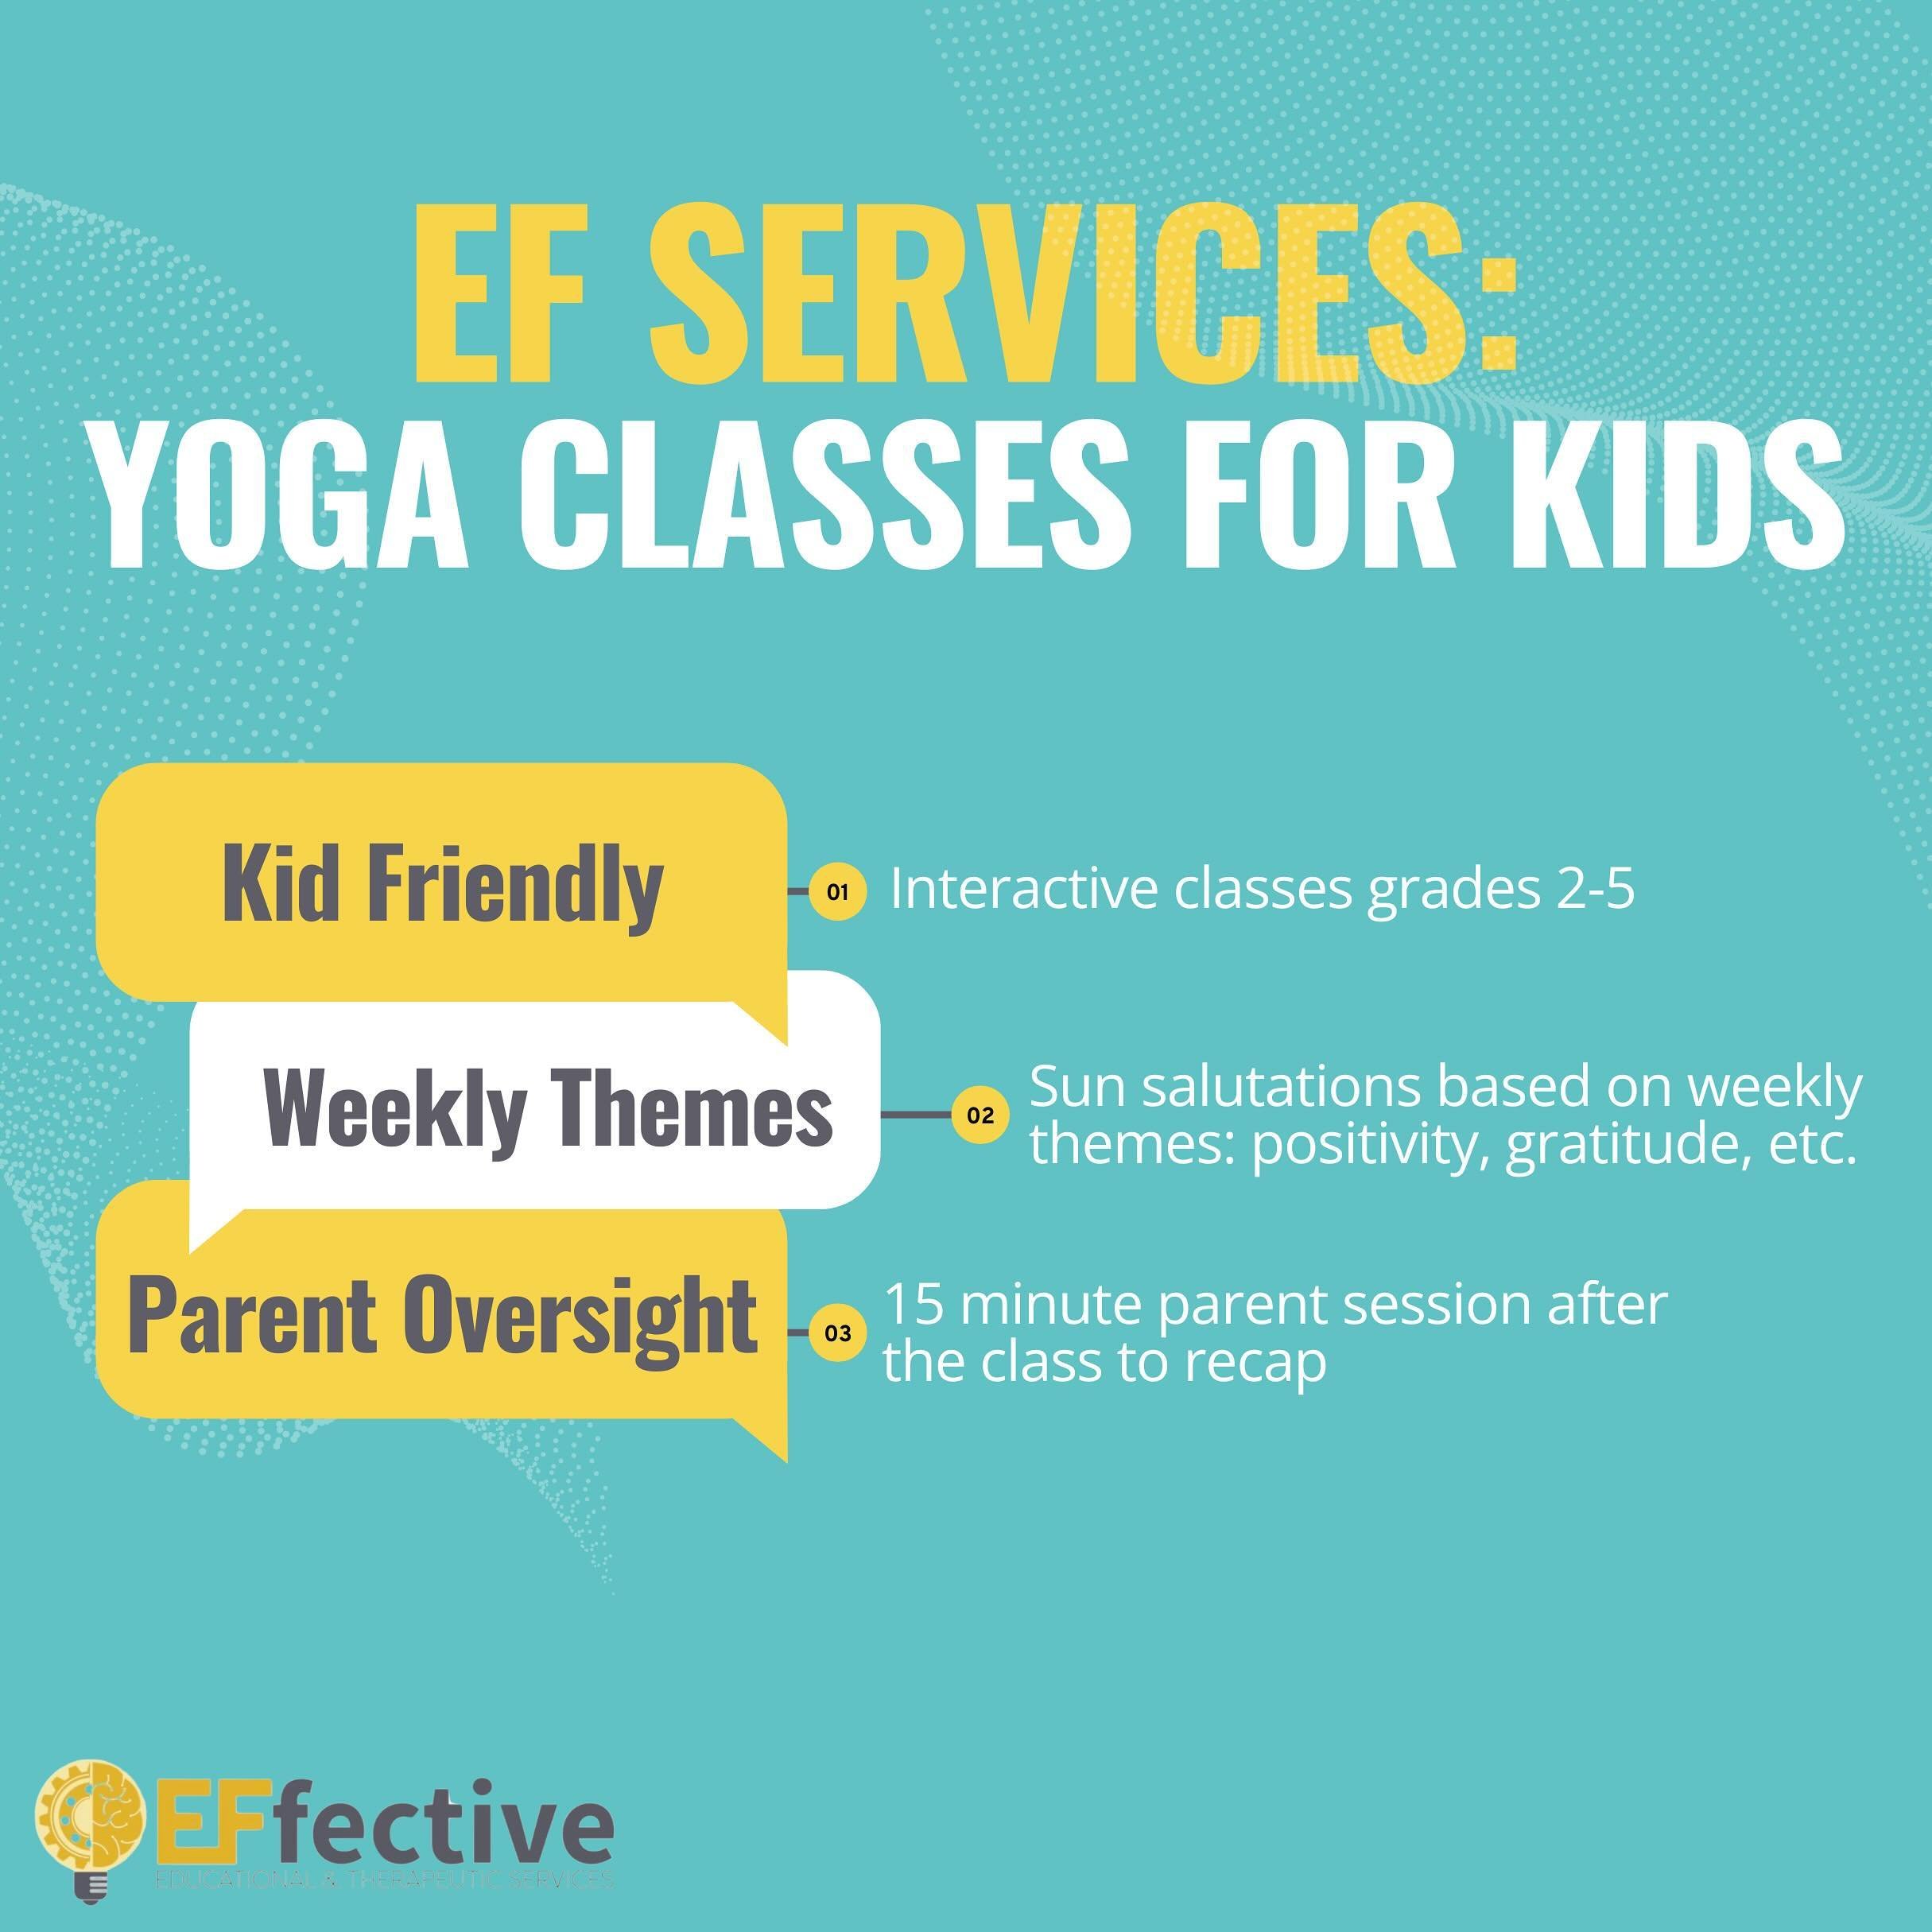 Nurture their inner peace from a young age! Join us for delightful yoga classes tailored for grades 2-5 where each week we focus on a new theme to center our sun salutations around! Email us at info@effective-services for more information.